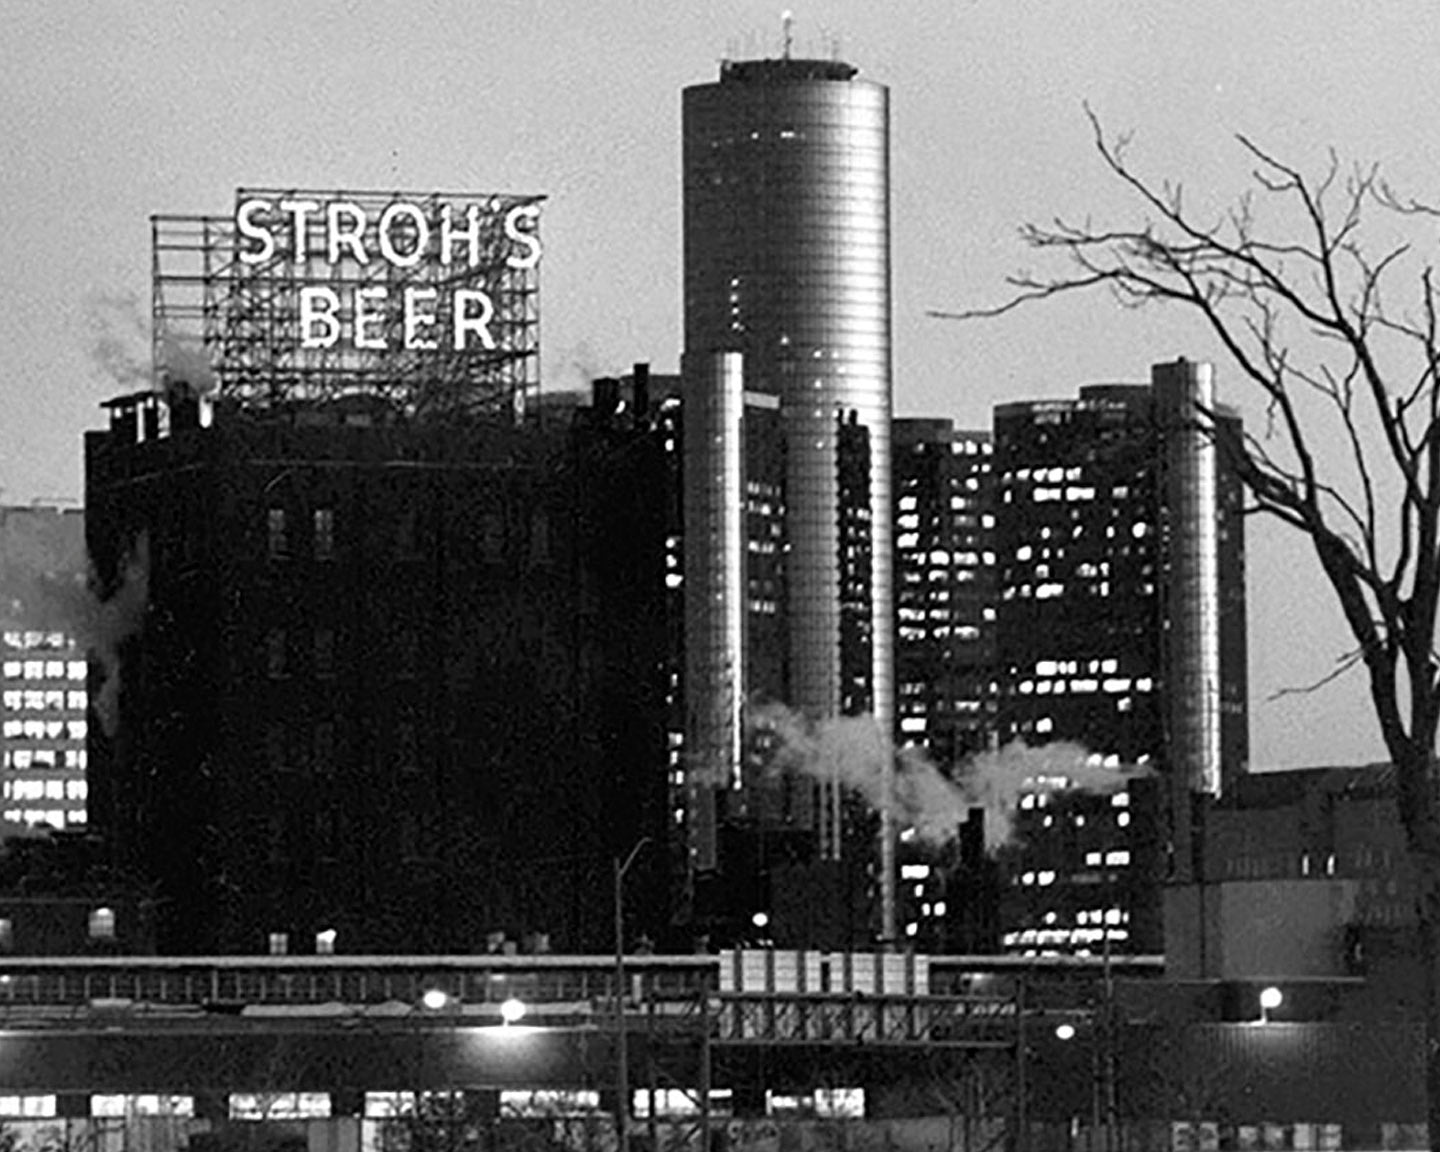 Stroh's Beer in 1985 the year the brewery closed - Officially Licensed Detroit News Framed Photo